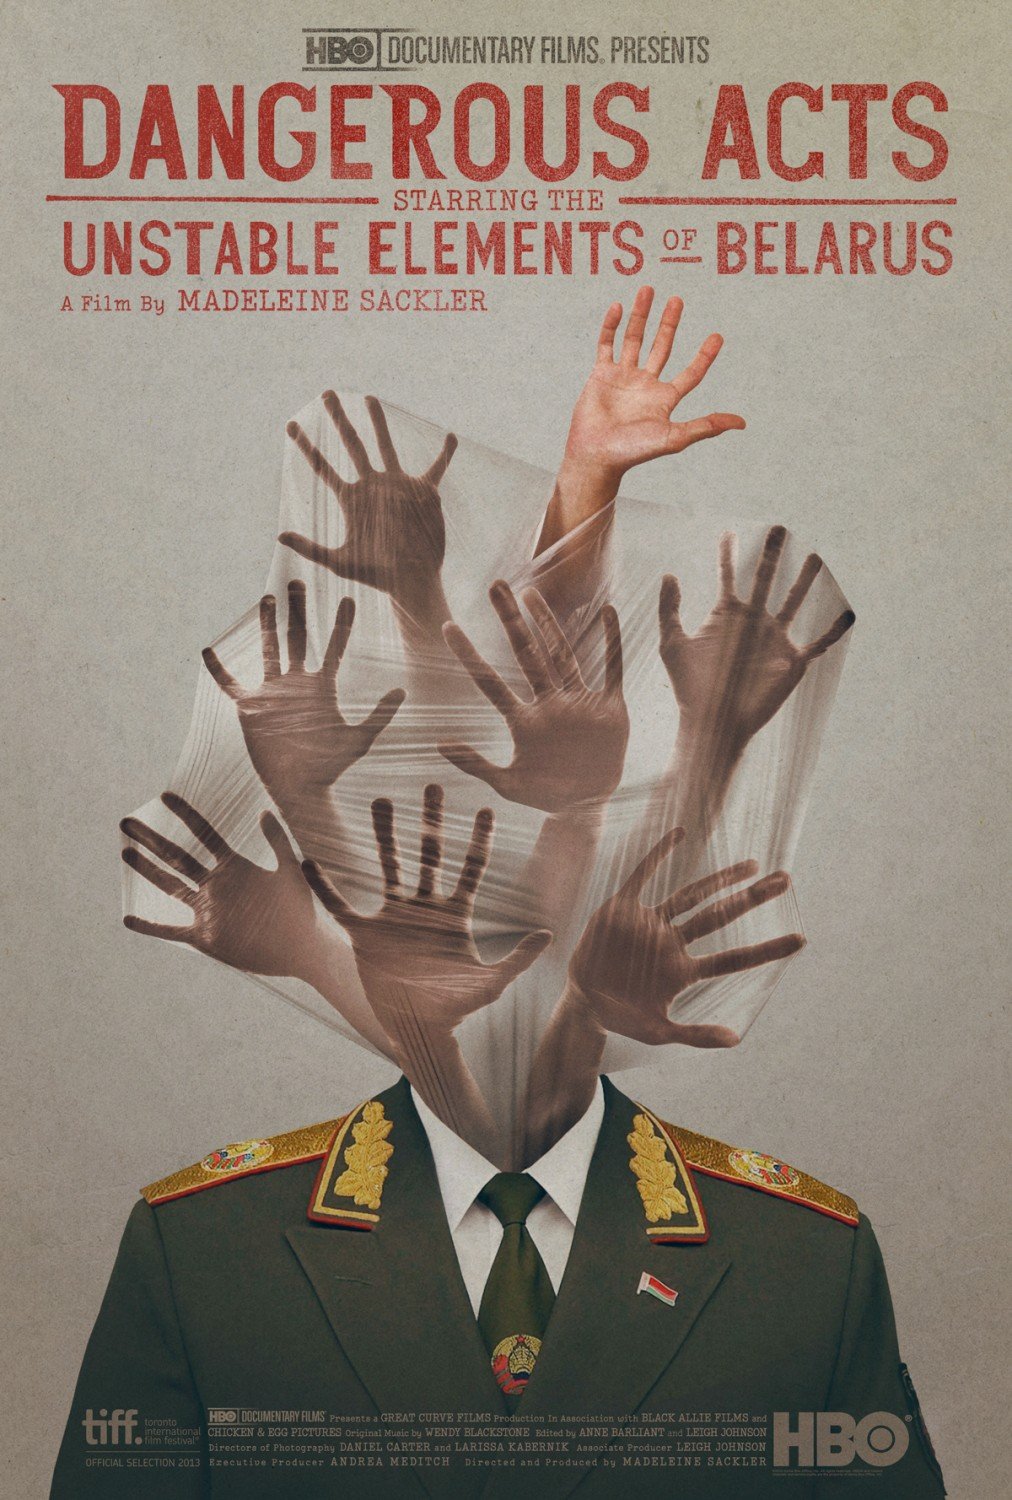 Poster of the movie Dangerous Acts Starring the Unstable Elements of Belarus